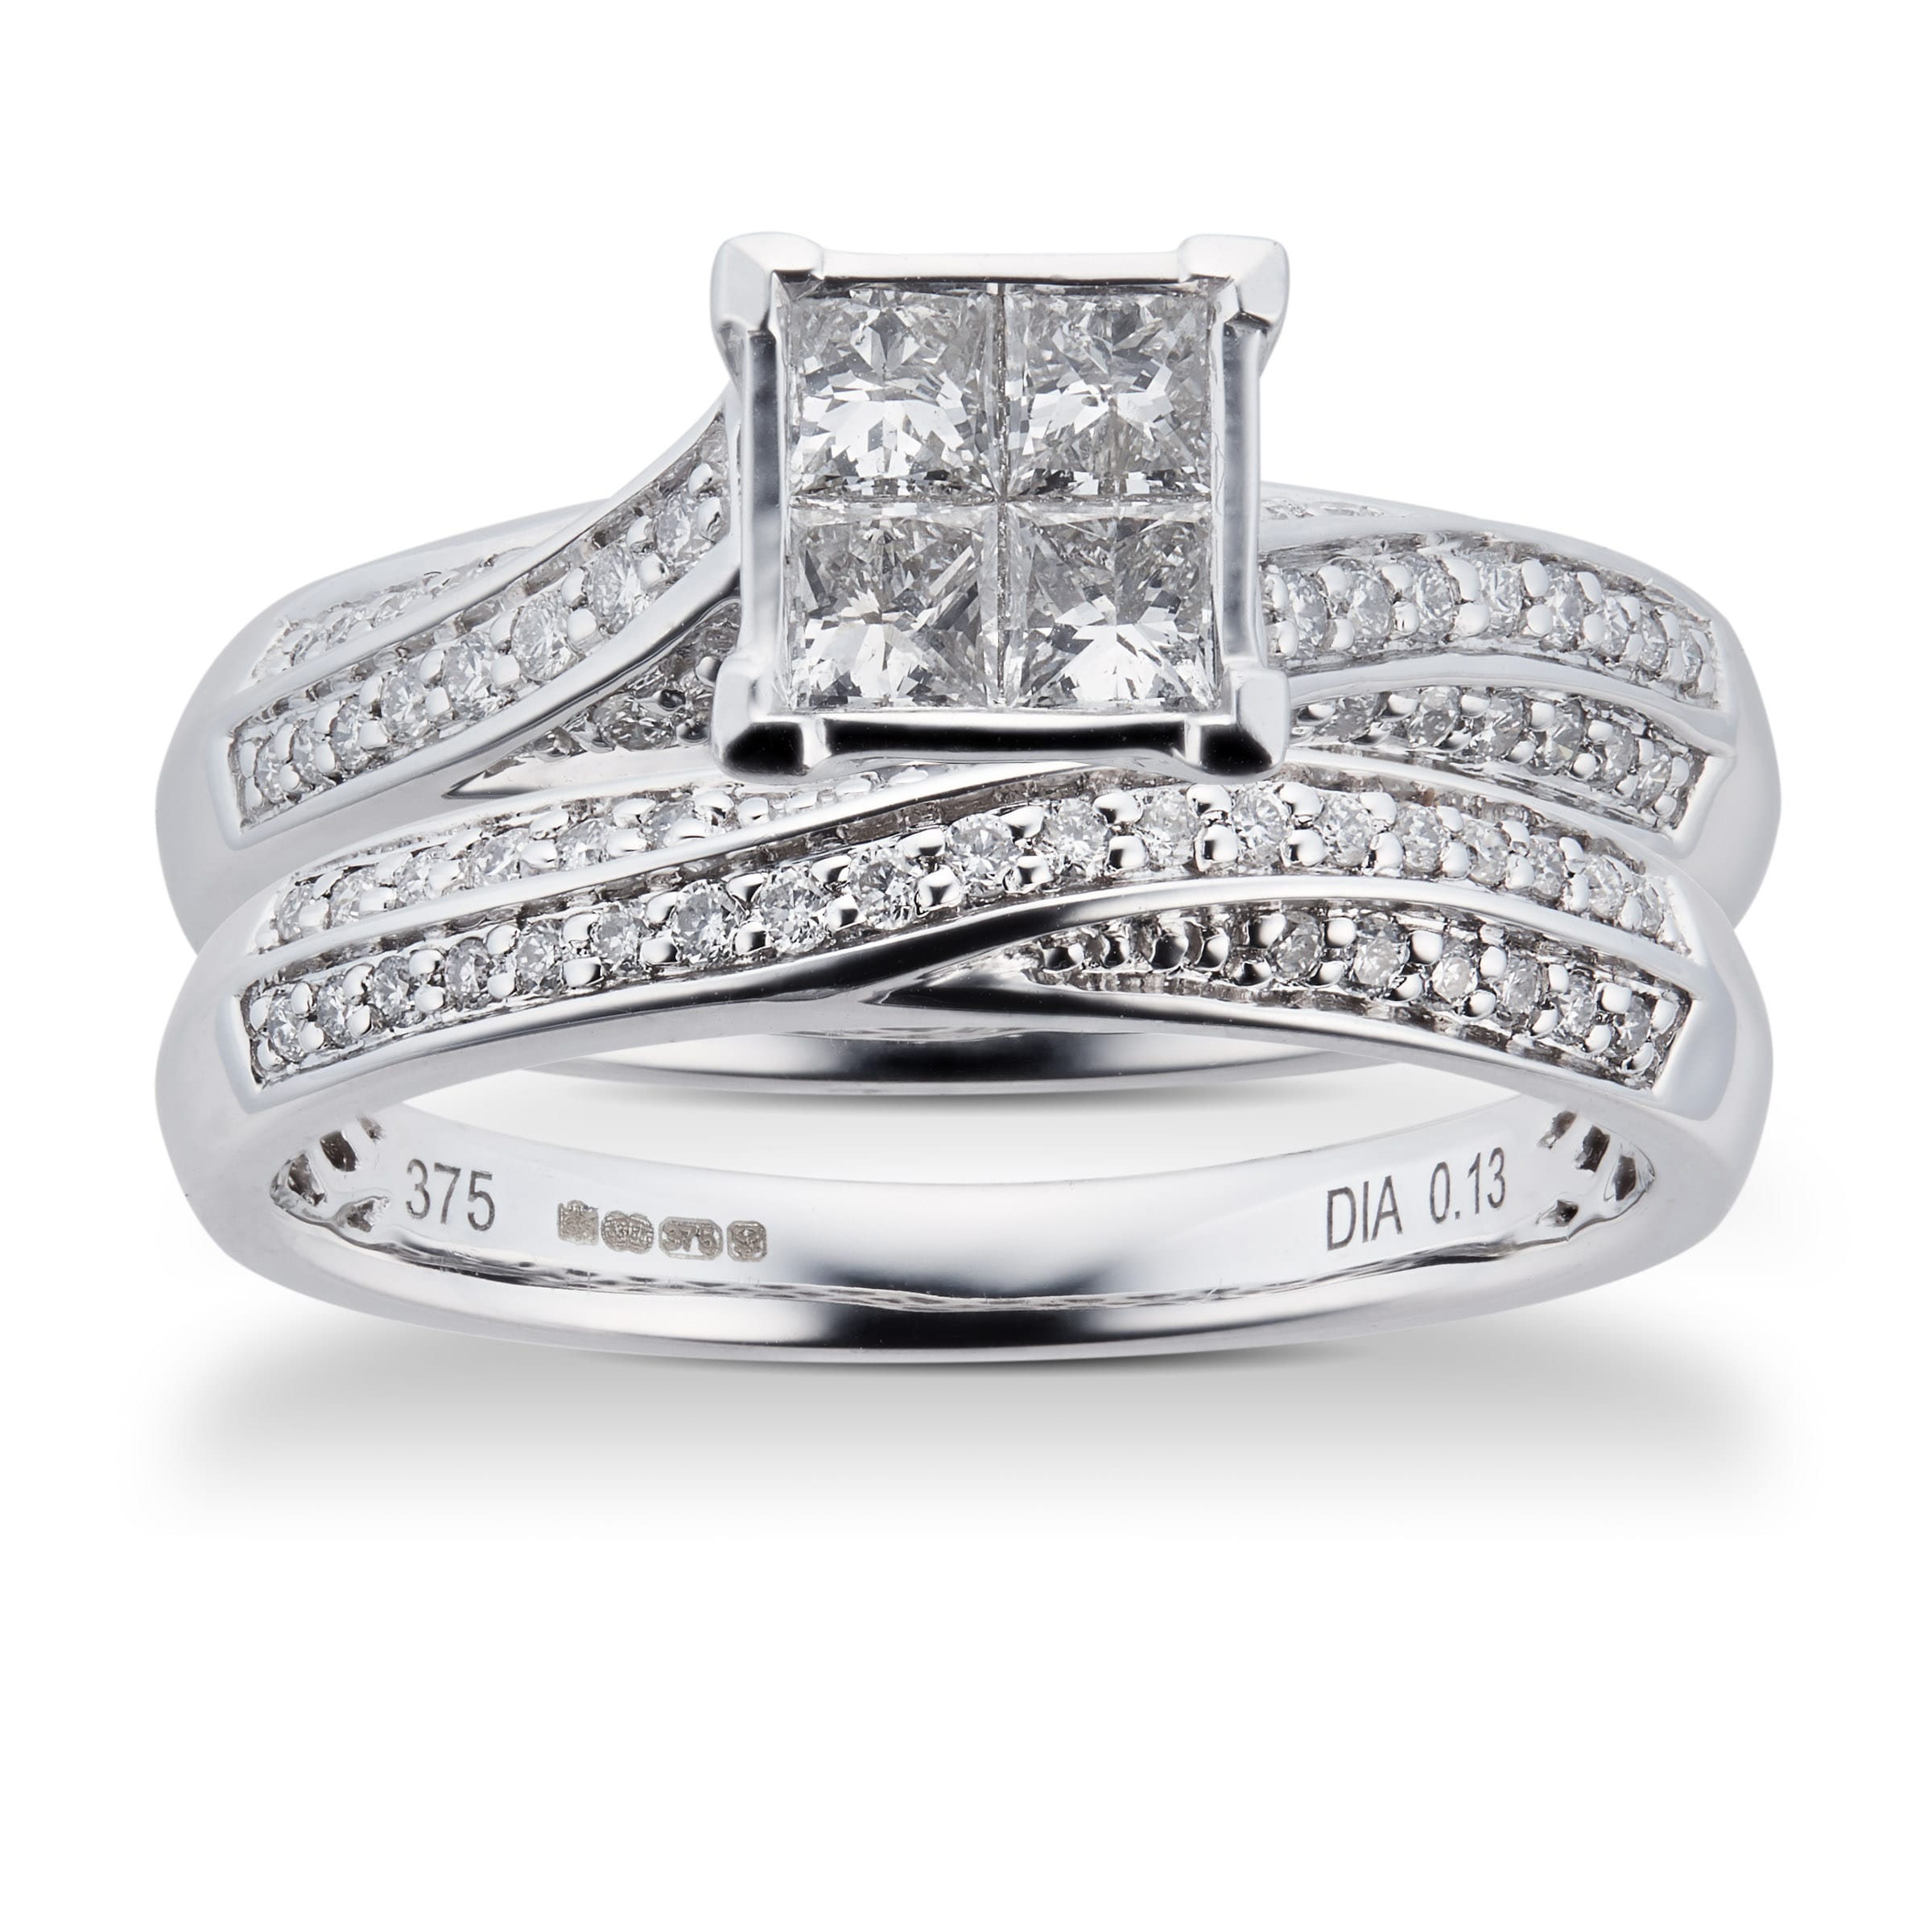 Princess And Brilliant Cut 0.76 Carat Total Weight Diamond Bridal Set In 9 Carat White Gold - Ring Size J